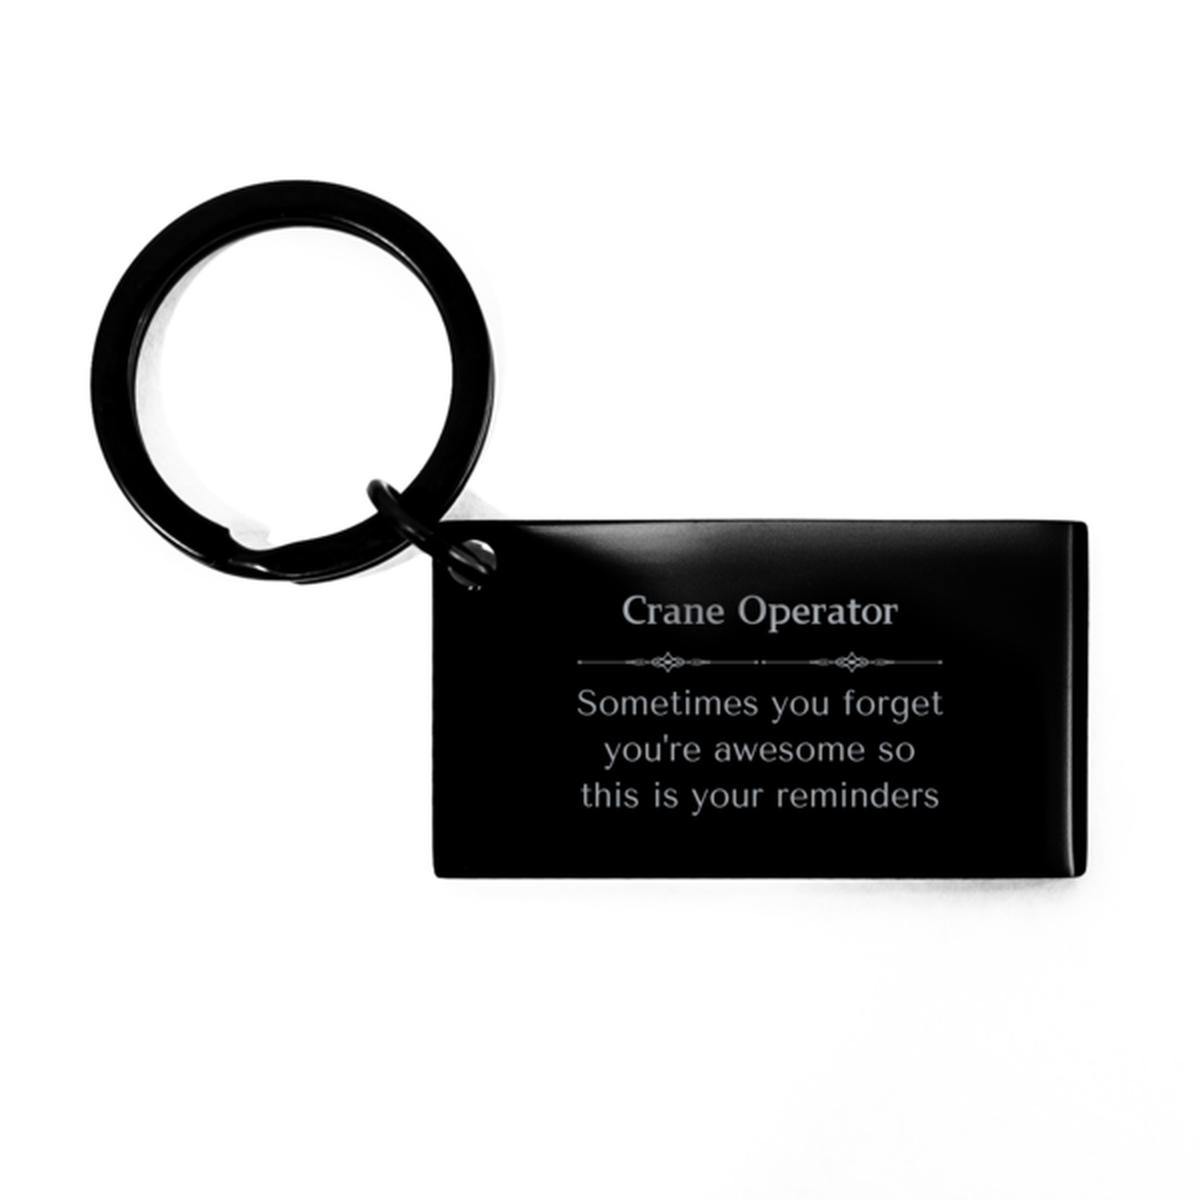 Sentimental Crane Operator Keychain, Flight Attendant Sometimes you forget you're awesome so this is your reminders, Graduation Christmas Birthday Gifts for Crane Operator, Men, Women, Coworkers